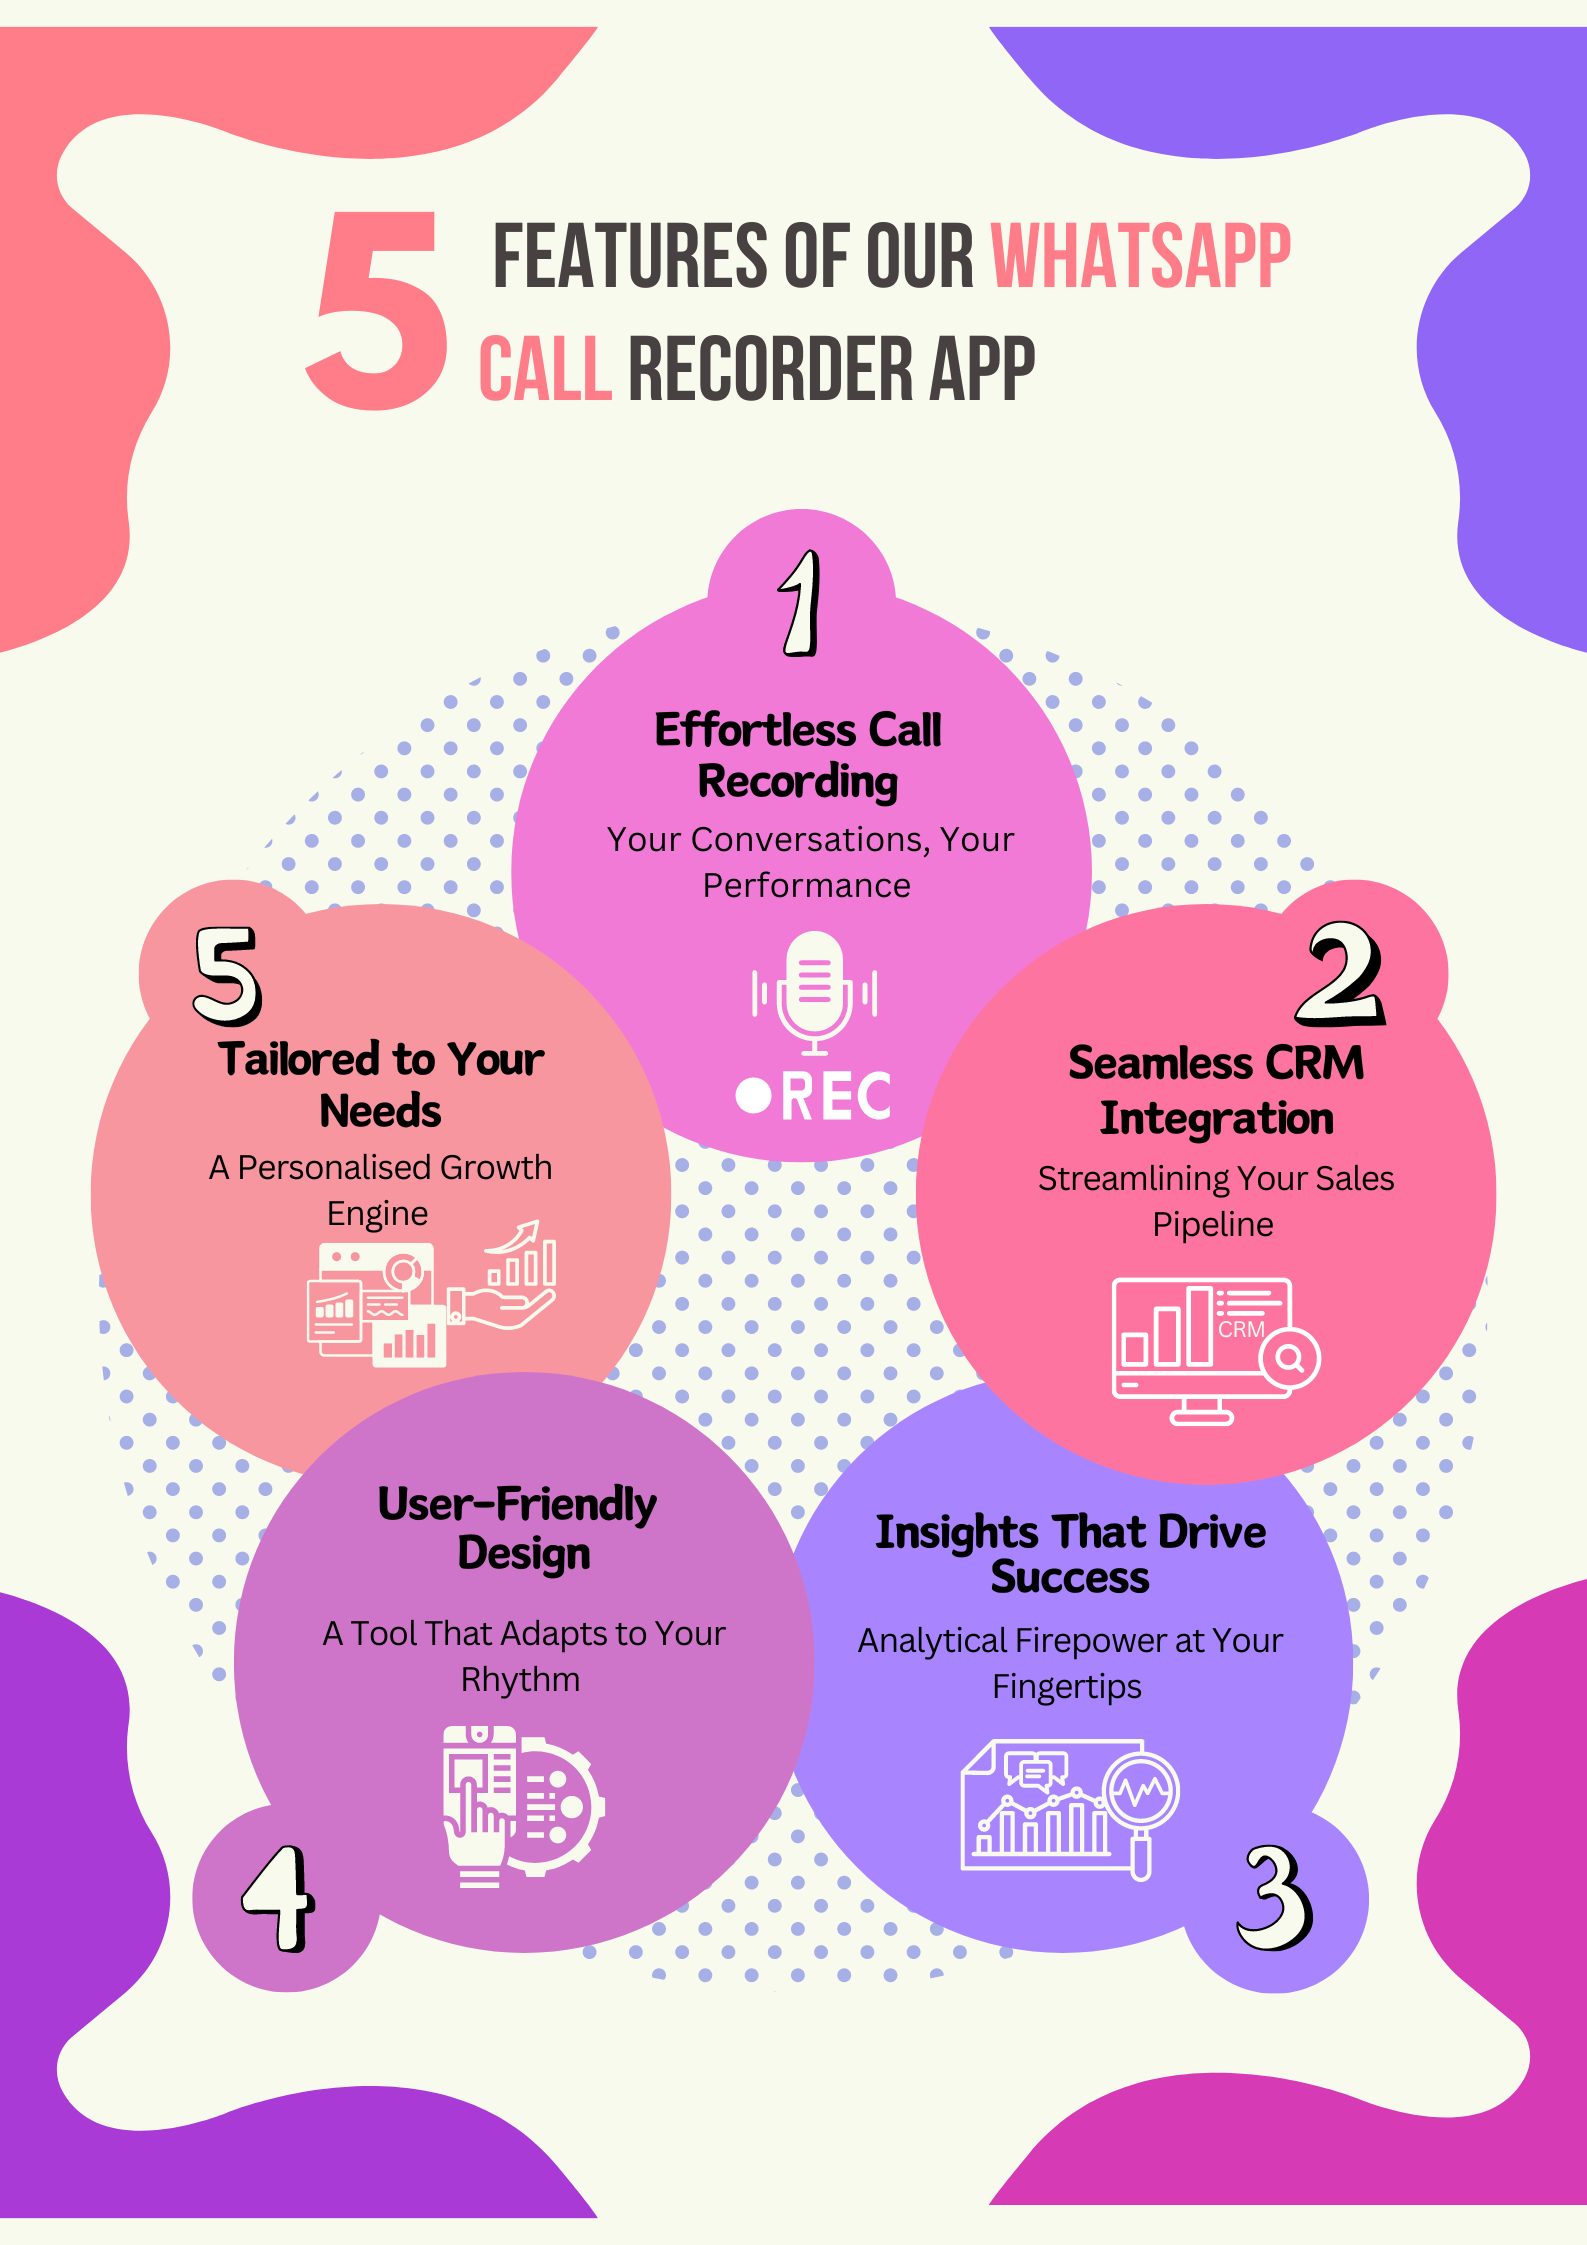 5 Features of Our Whatsapp Call Recorder AppSas